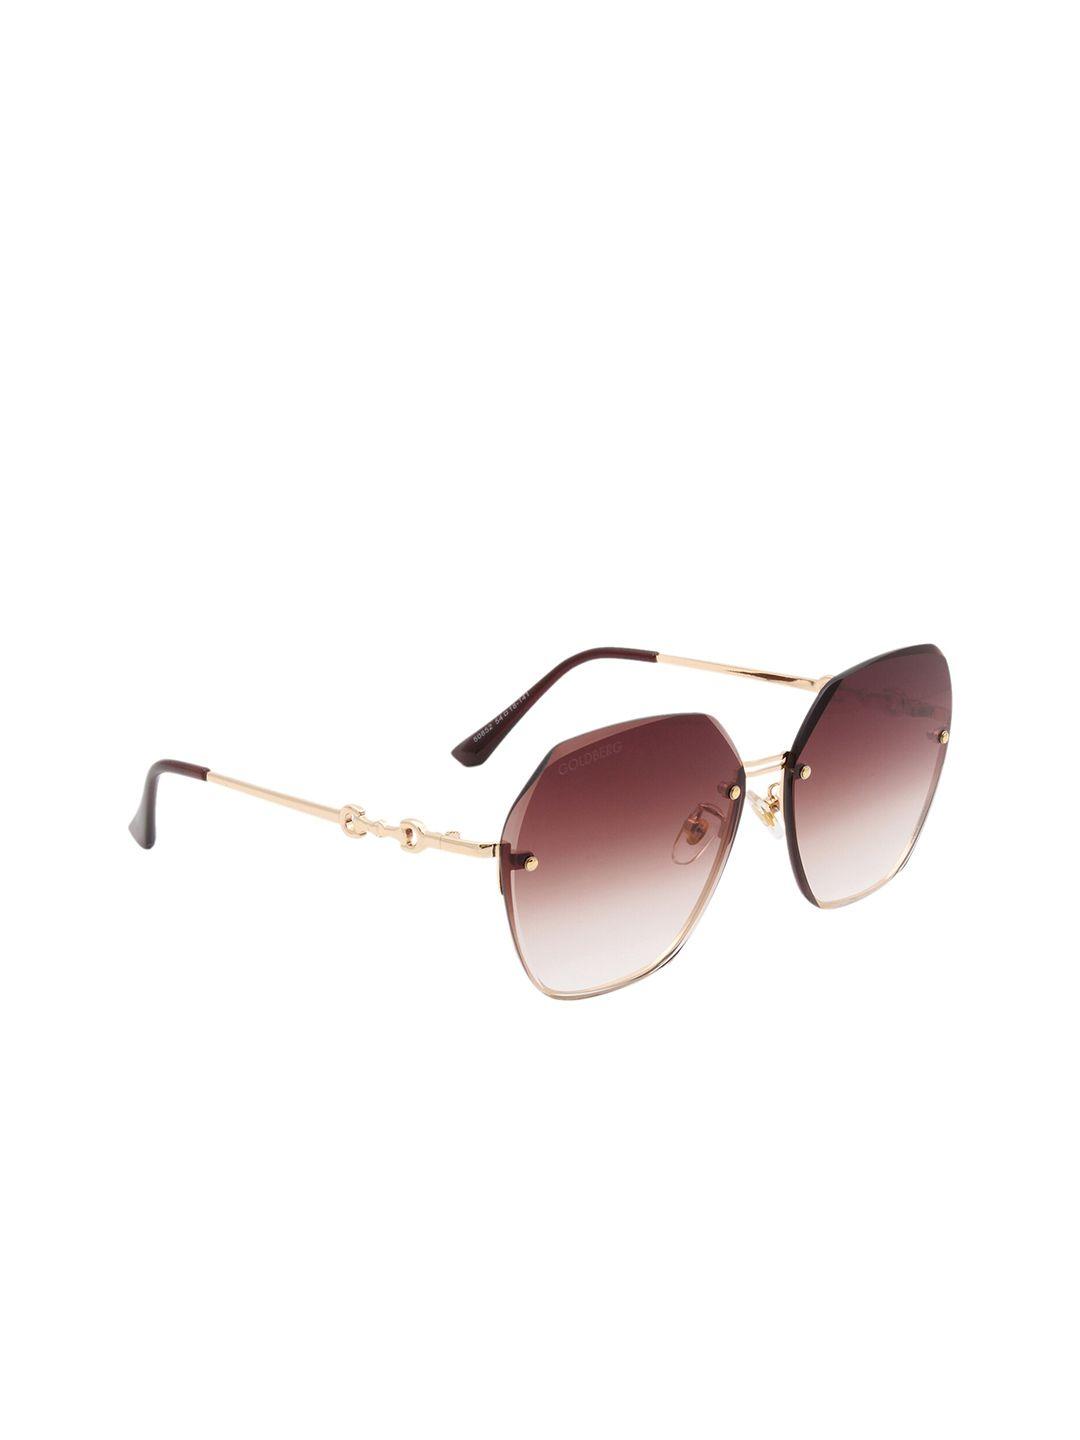 gold berg women brown lens & gold-toned sunglasses with uv protected lens-gb-50852_gld-brn